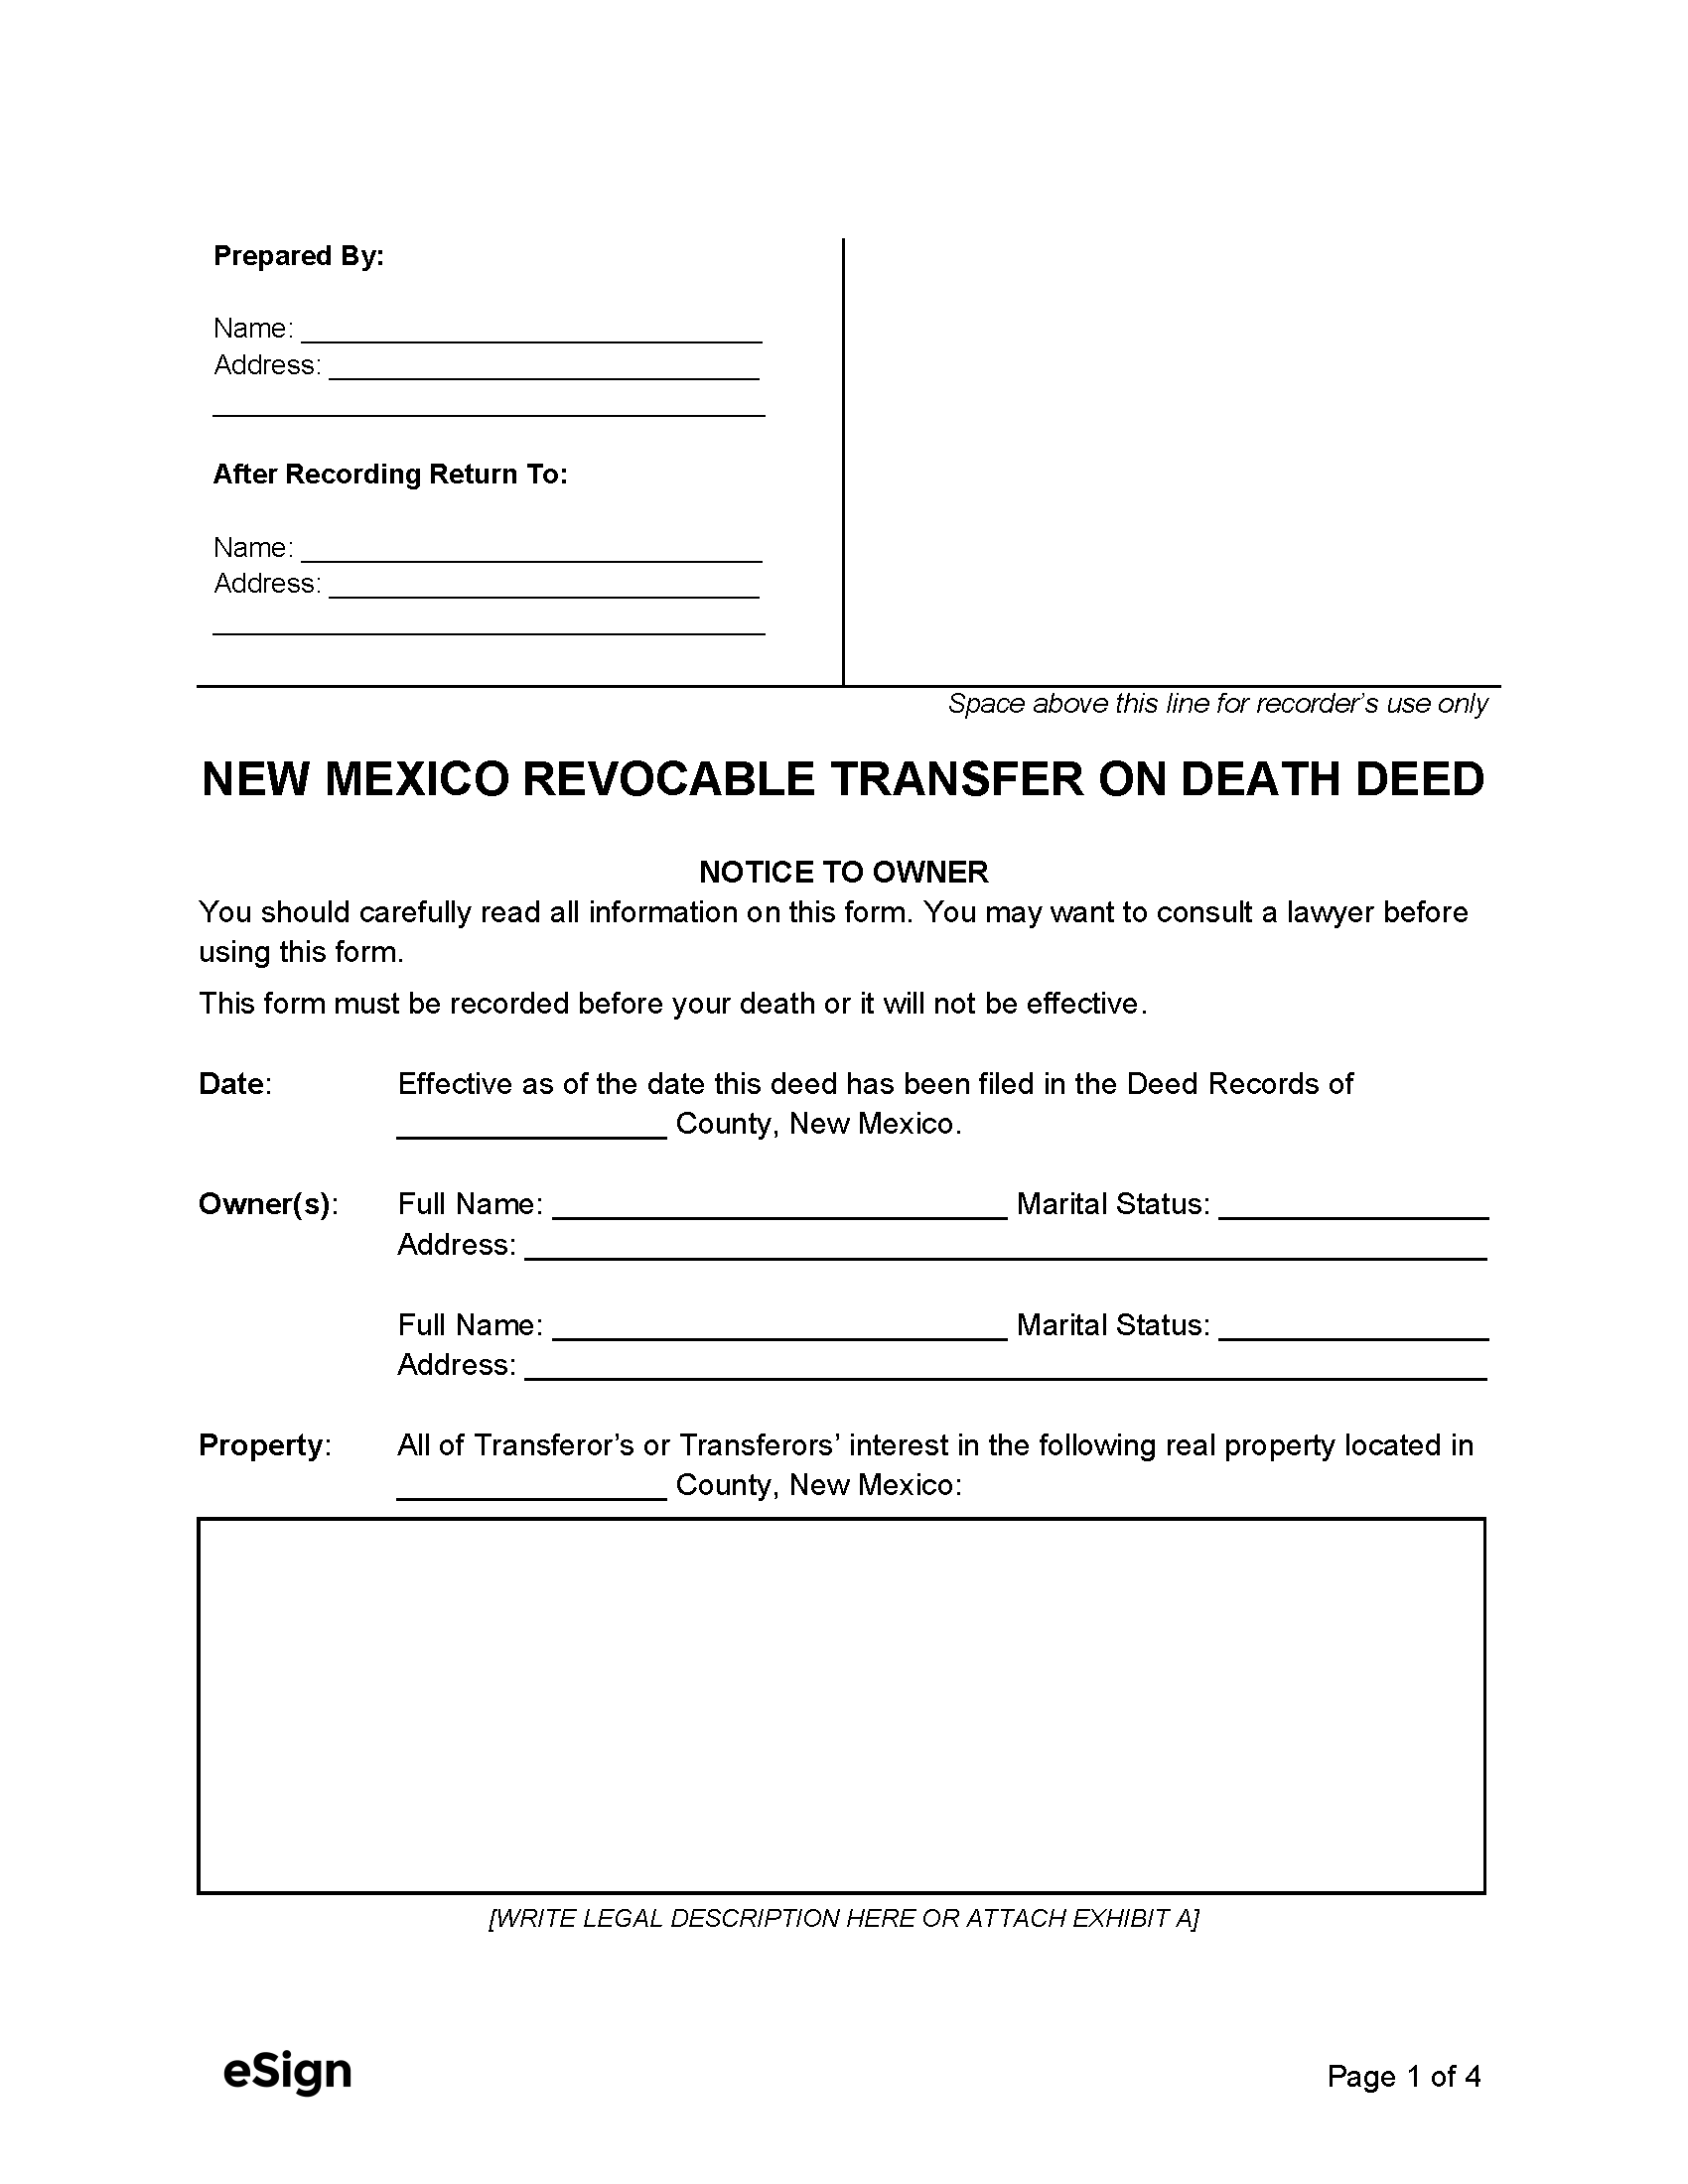 free-new-mexico-transfer-on-death-deed-pdf-word